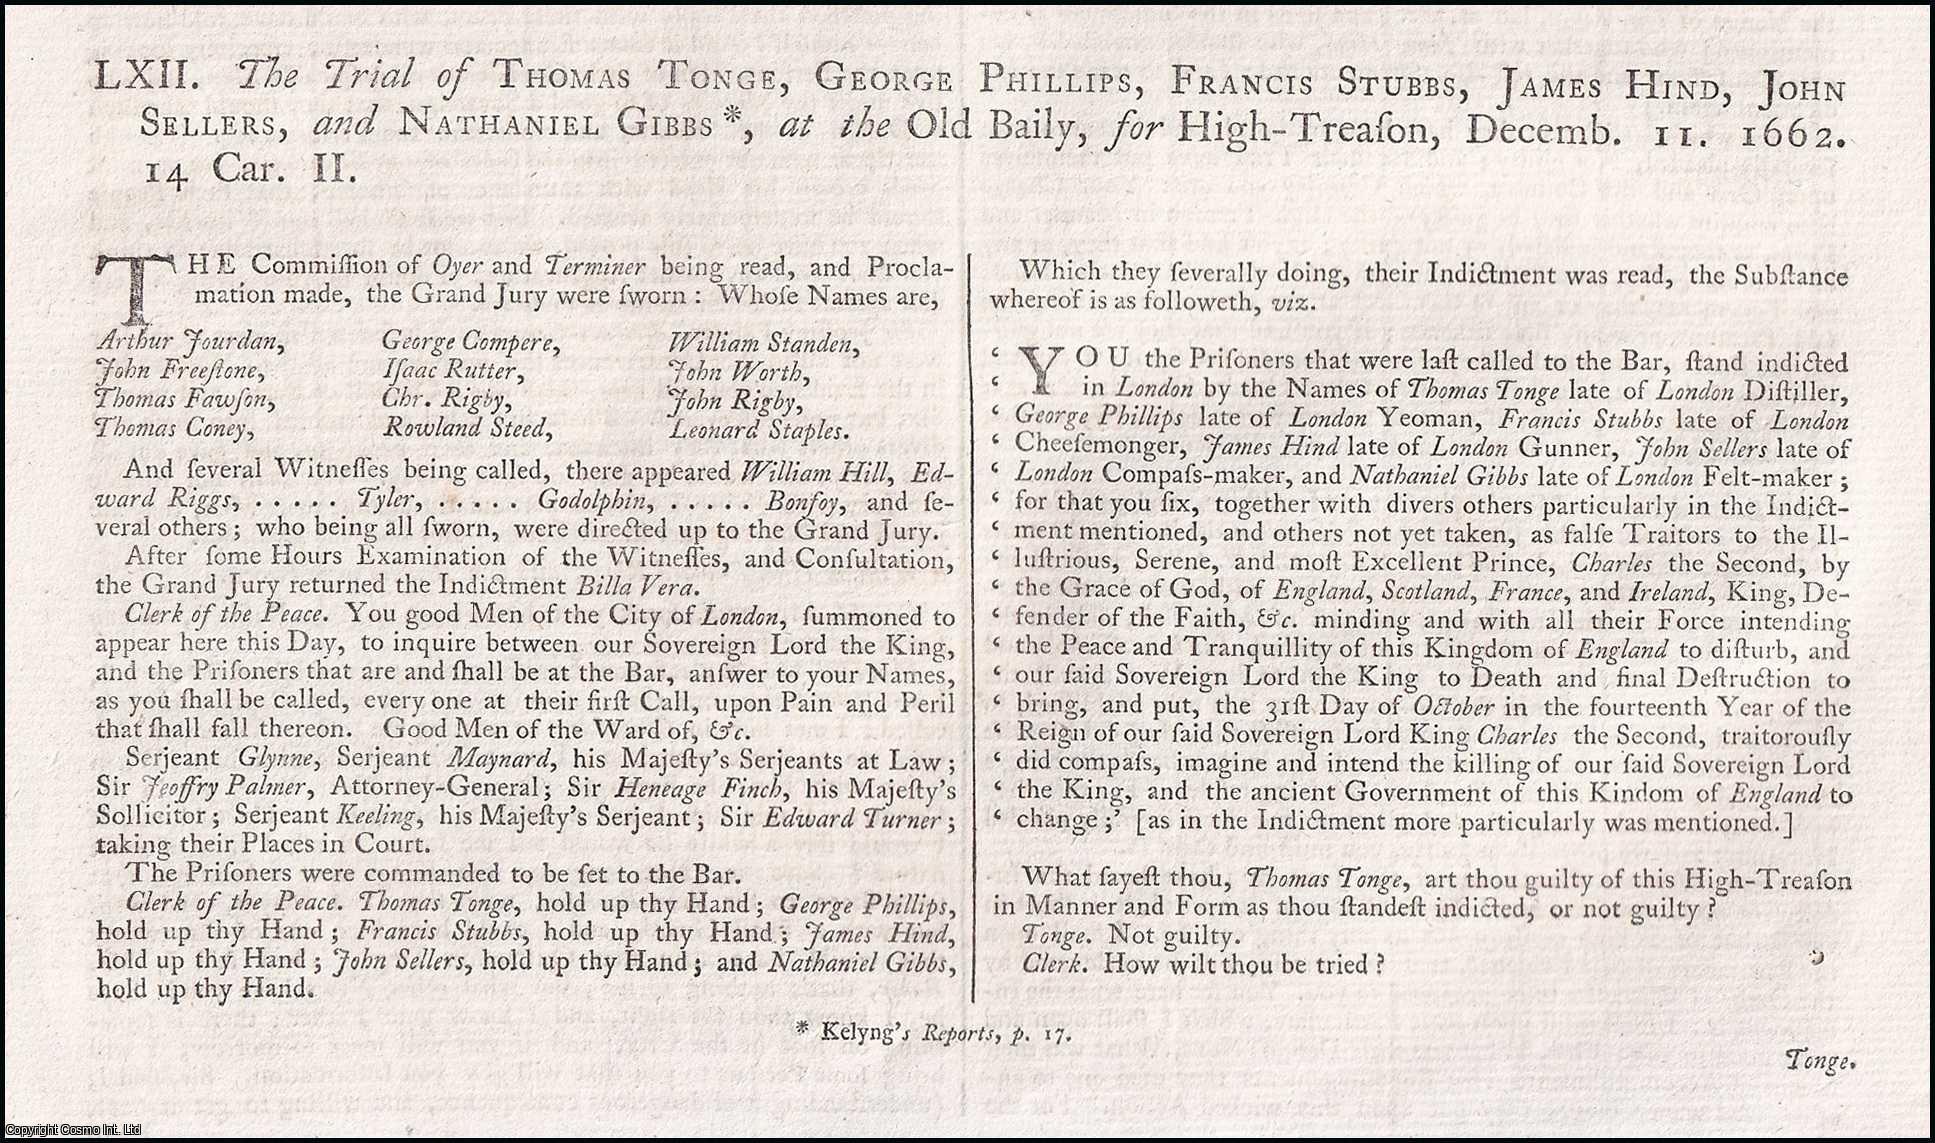 [Trial]. - The Trial of Thomas Tonge, George Phillips, Francis Stubbs, James Hind, John Sellers, & Nathaniel Gibbs, at the Old Baily, for High-Treason, December. 11. 1662. An original report from the Collected State Trials.